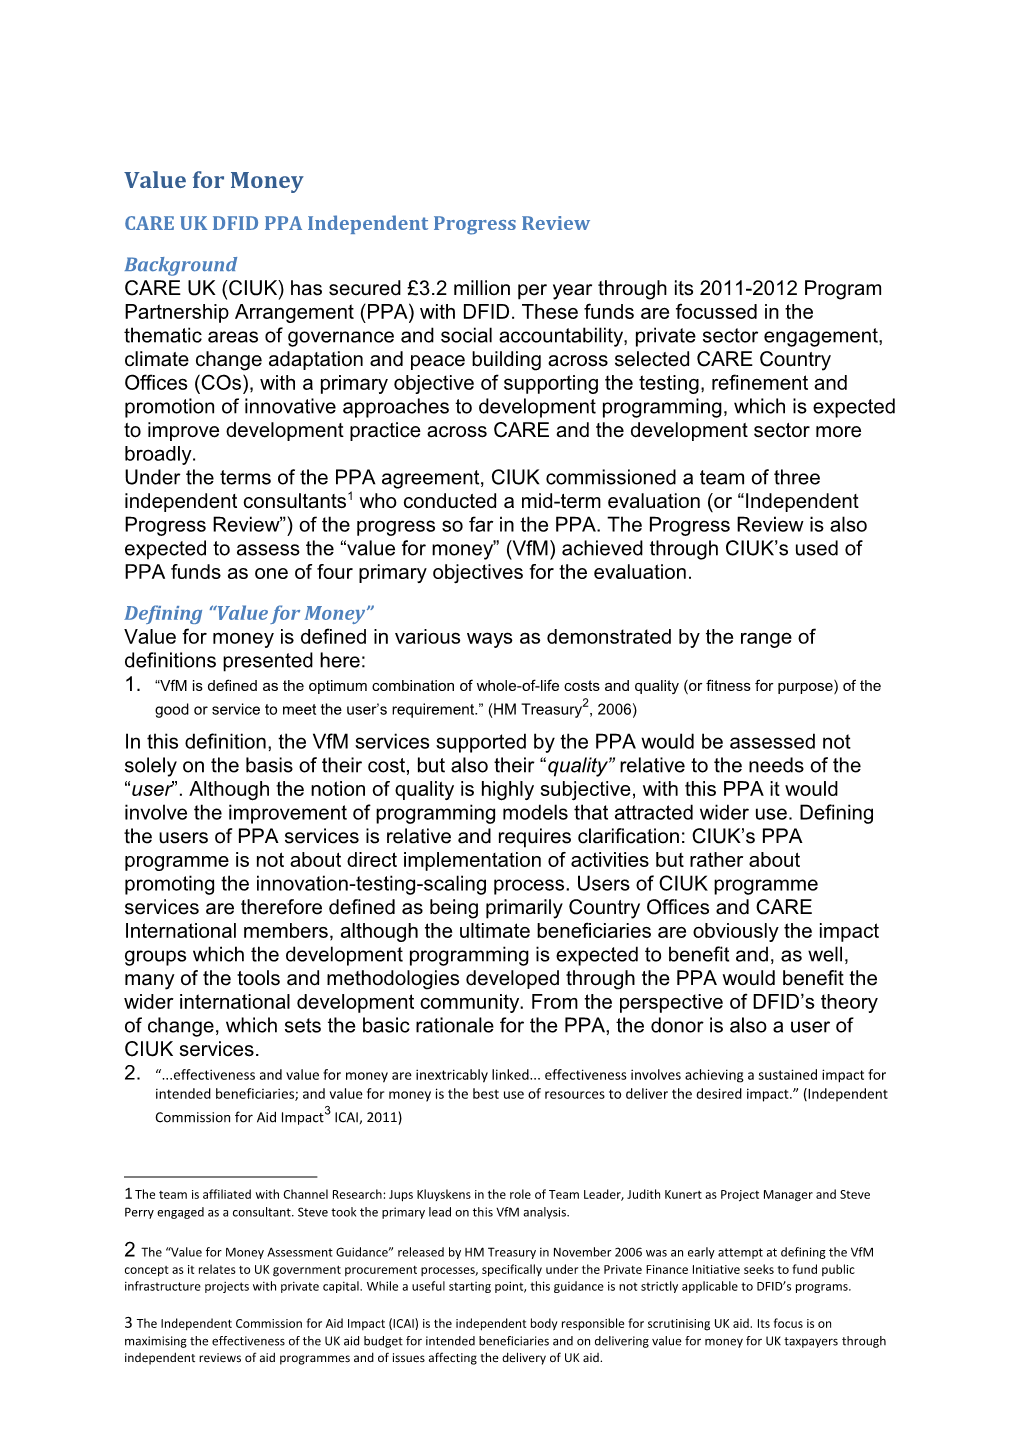 CARE UK DFID PPA Independent Progress Review